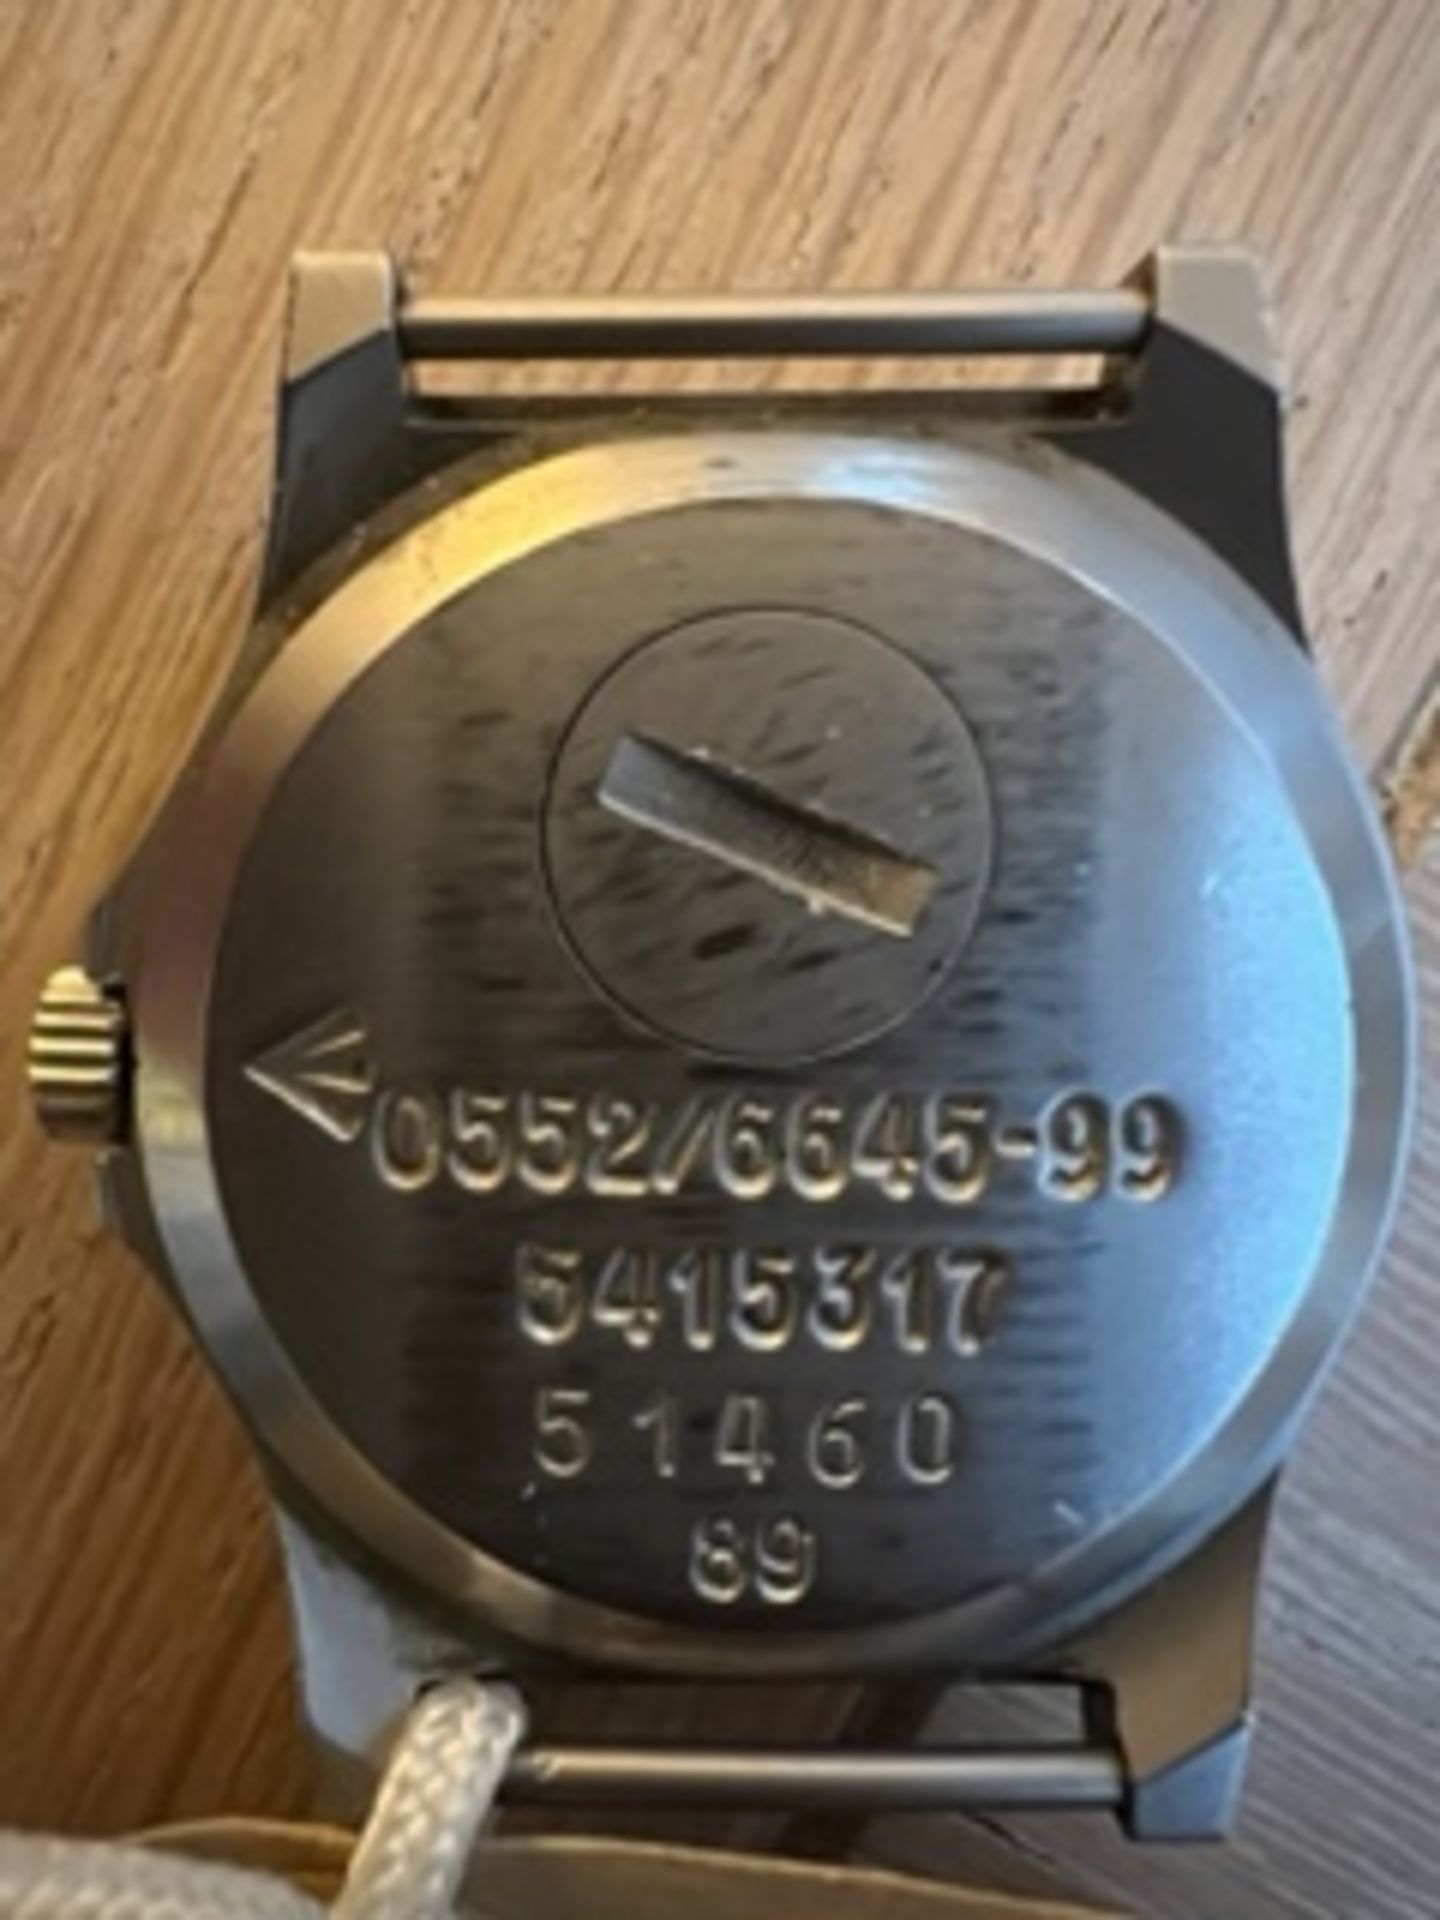 RARE CWC 0552 R. MARINES ISSUE SERVICE WATCH NATO MARKS DATE 1989 NEW BATTERY FITTED - Image 5 of 6